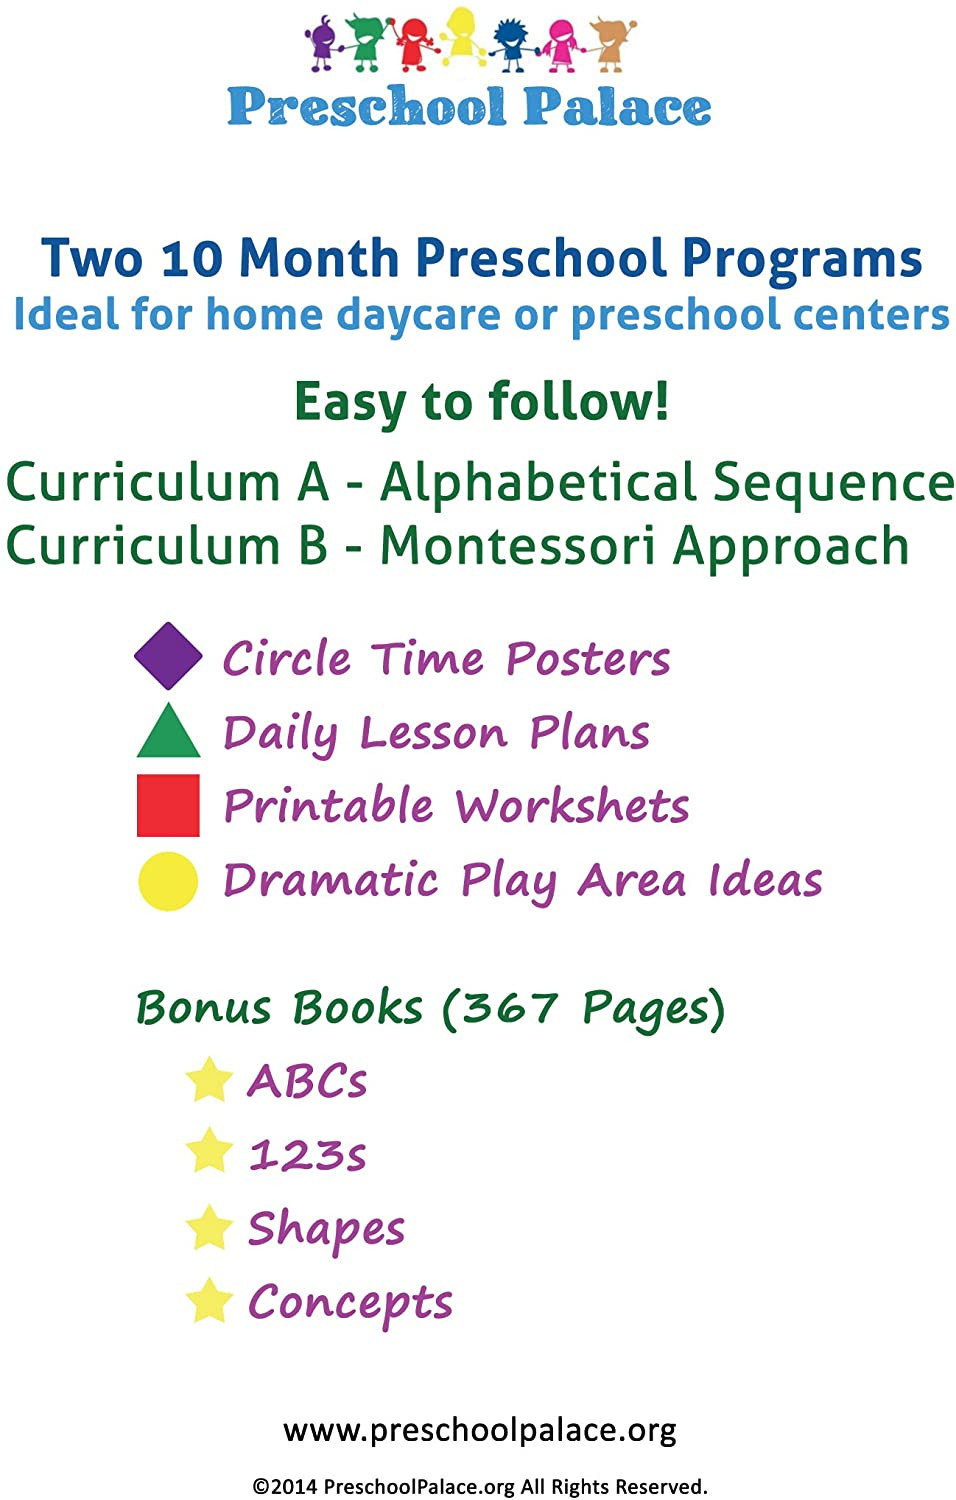 Preschool Palace Curriculum the Ultimate Preschool Curriculum Kit Printable Workbooks Lesson Plans and Learning Activities for Preschoolers Pre K Kids and toddlers Ages 3